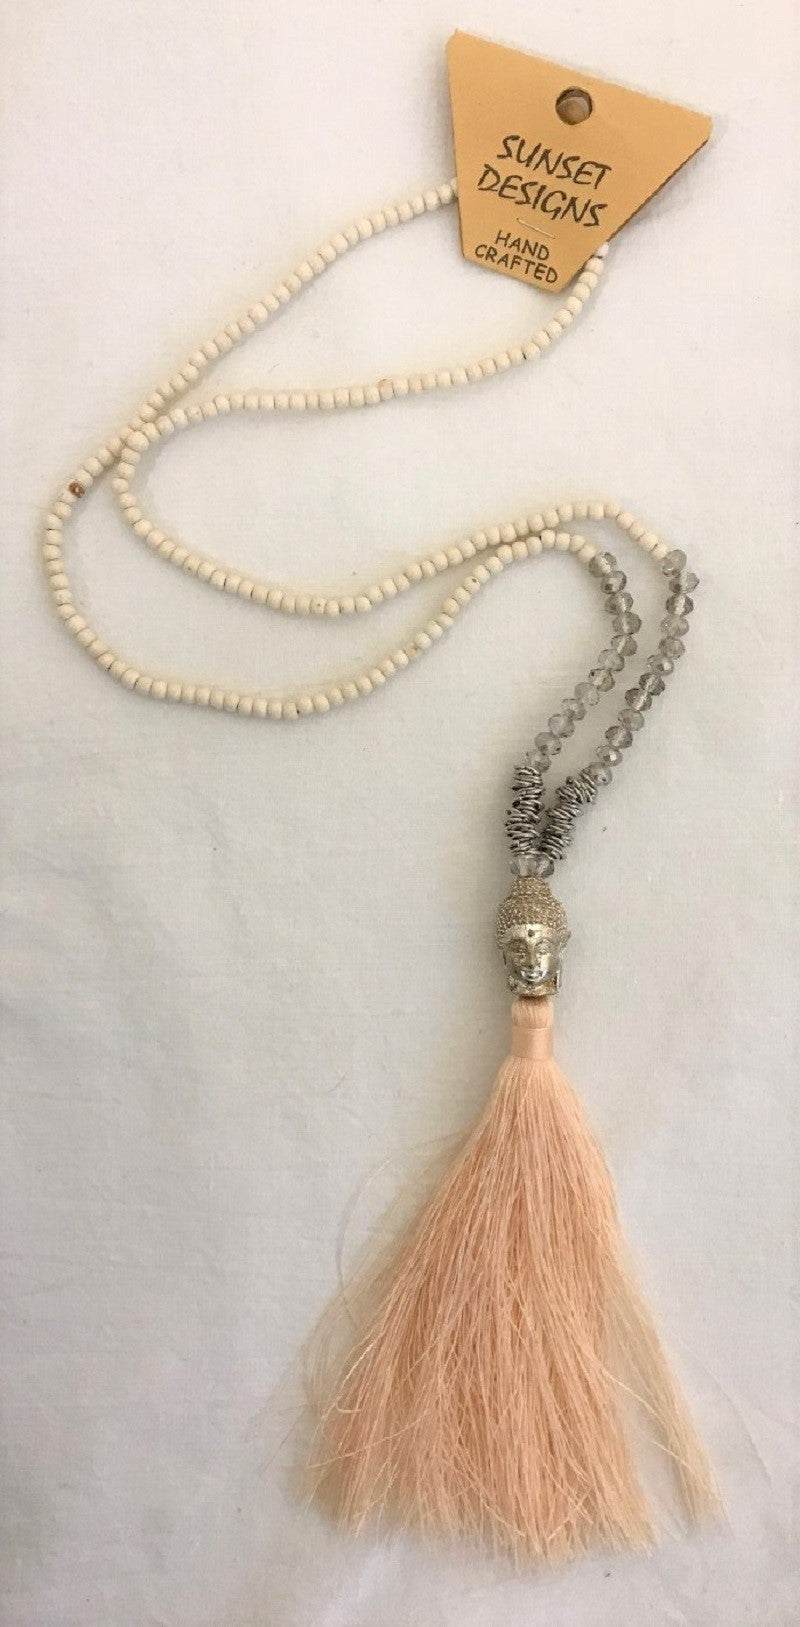 necklace - cream - silver budha head - clear crystal/metal ring beads - string tassle